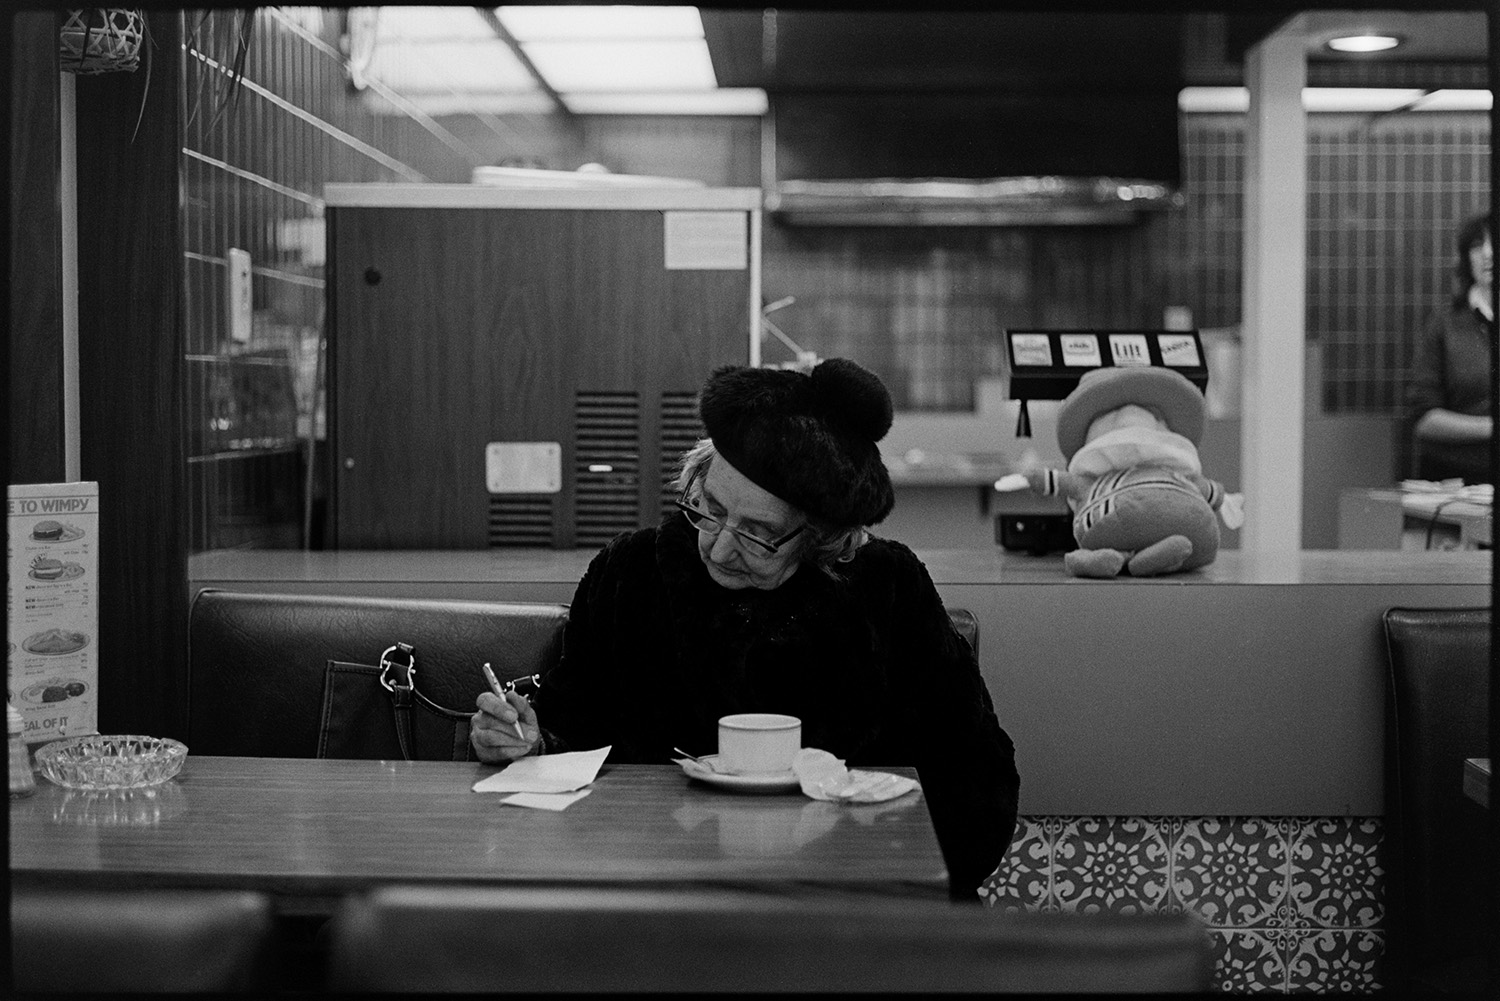 Woman in hat having tea, café.
[A woman wearing a black hat sitting in the Wimpy café in Barnstaple writing a note. An ashtray and cup and saucer is on the table. A toy mascot is on the counter by a drinks machine.]